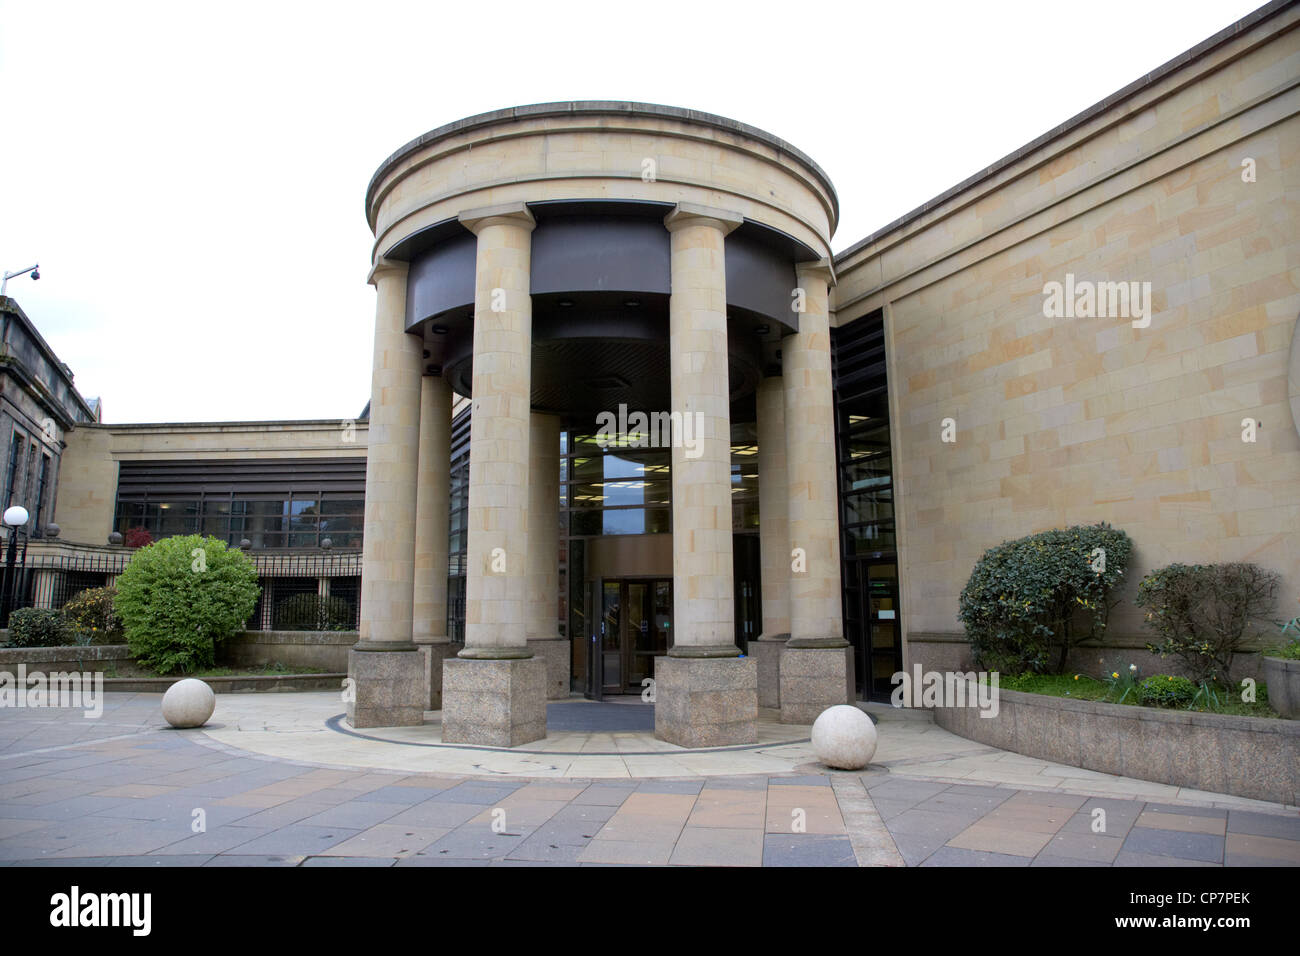 La High Court of justiciary glasgow Scotland UK Banque D'Images